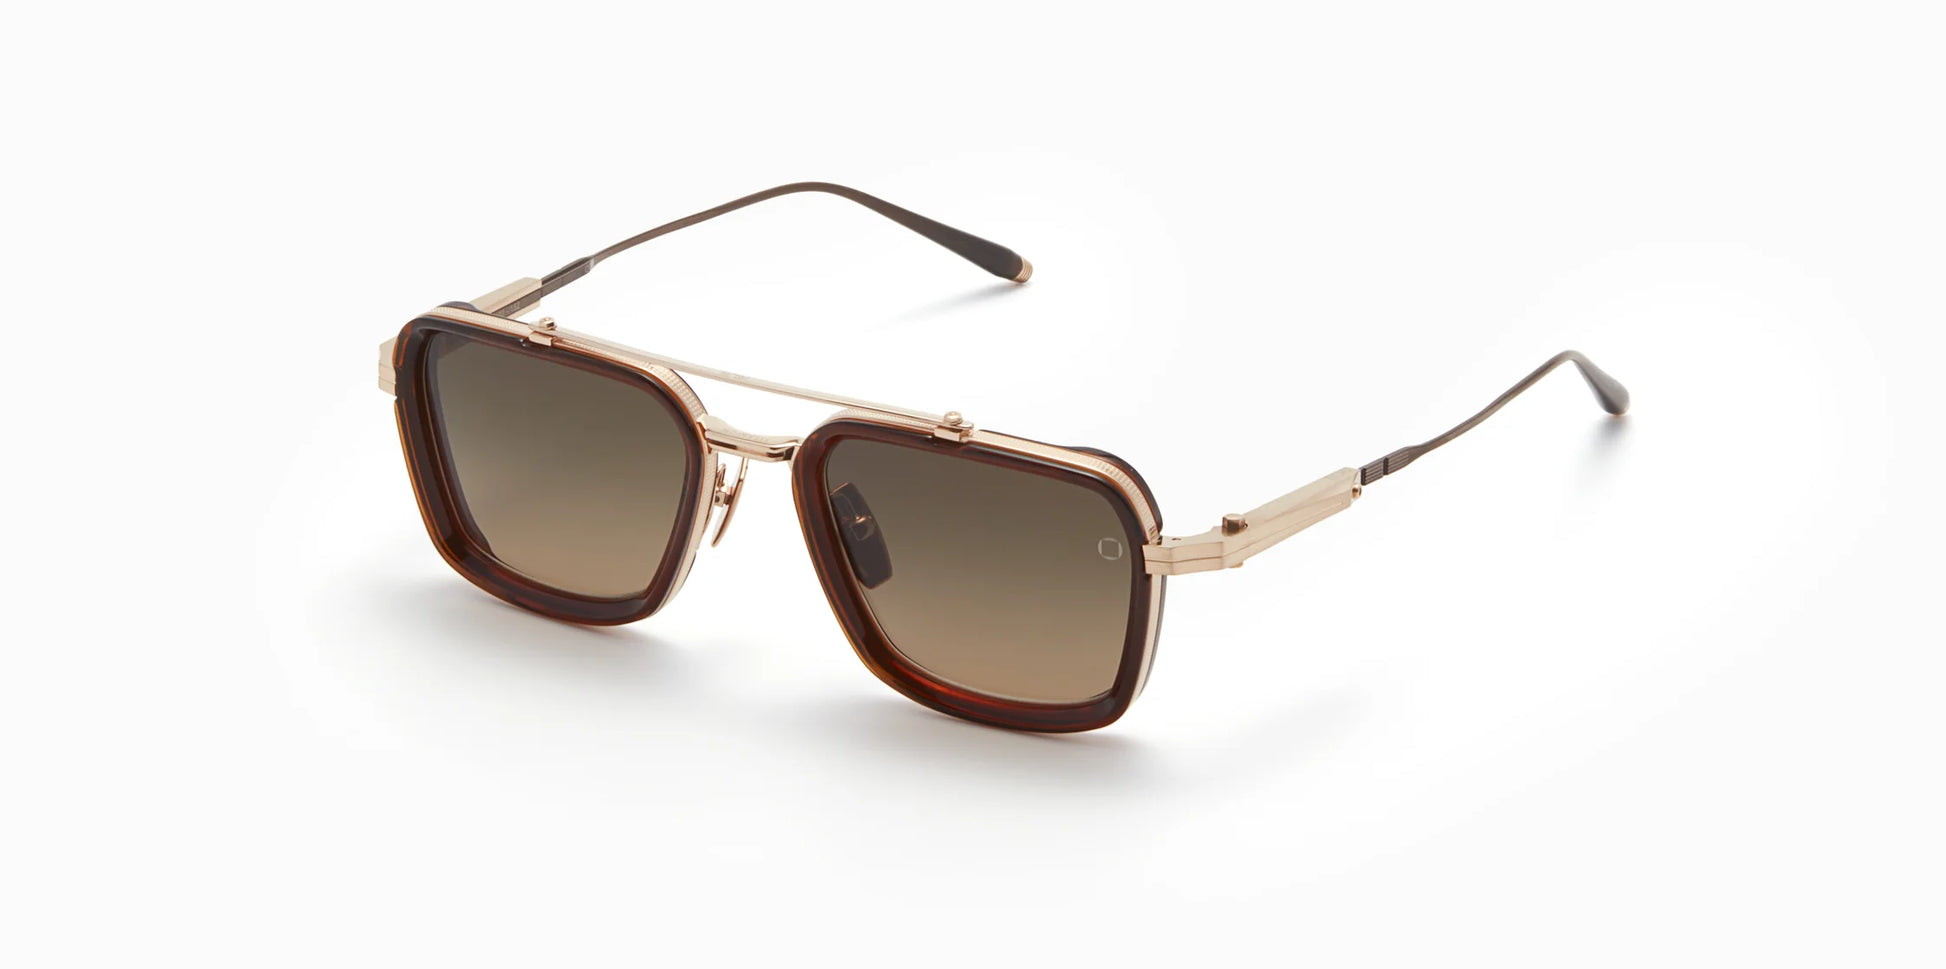 Three-quarter view of Akoni's new "Solis" frame in the white gold/dark brown crystal colorway, a squared-off navigator silhouette with adjustable temples and a sculpted Japanese Acetate front set within a striking Japanese Titanium frame.